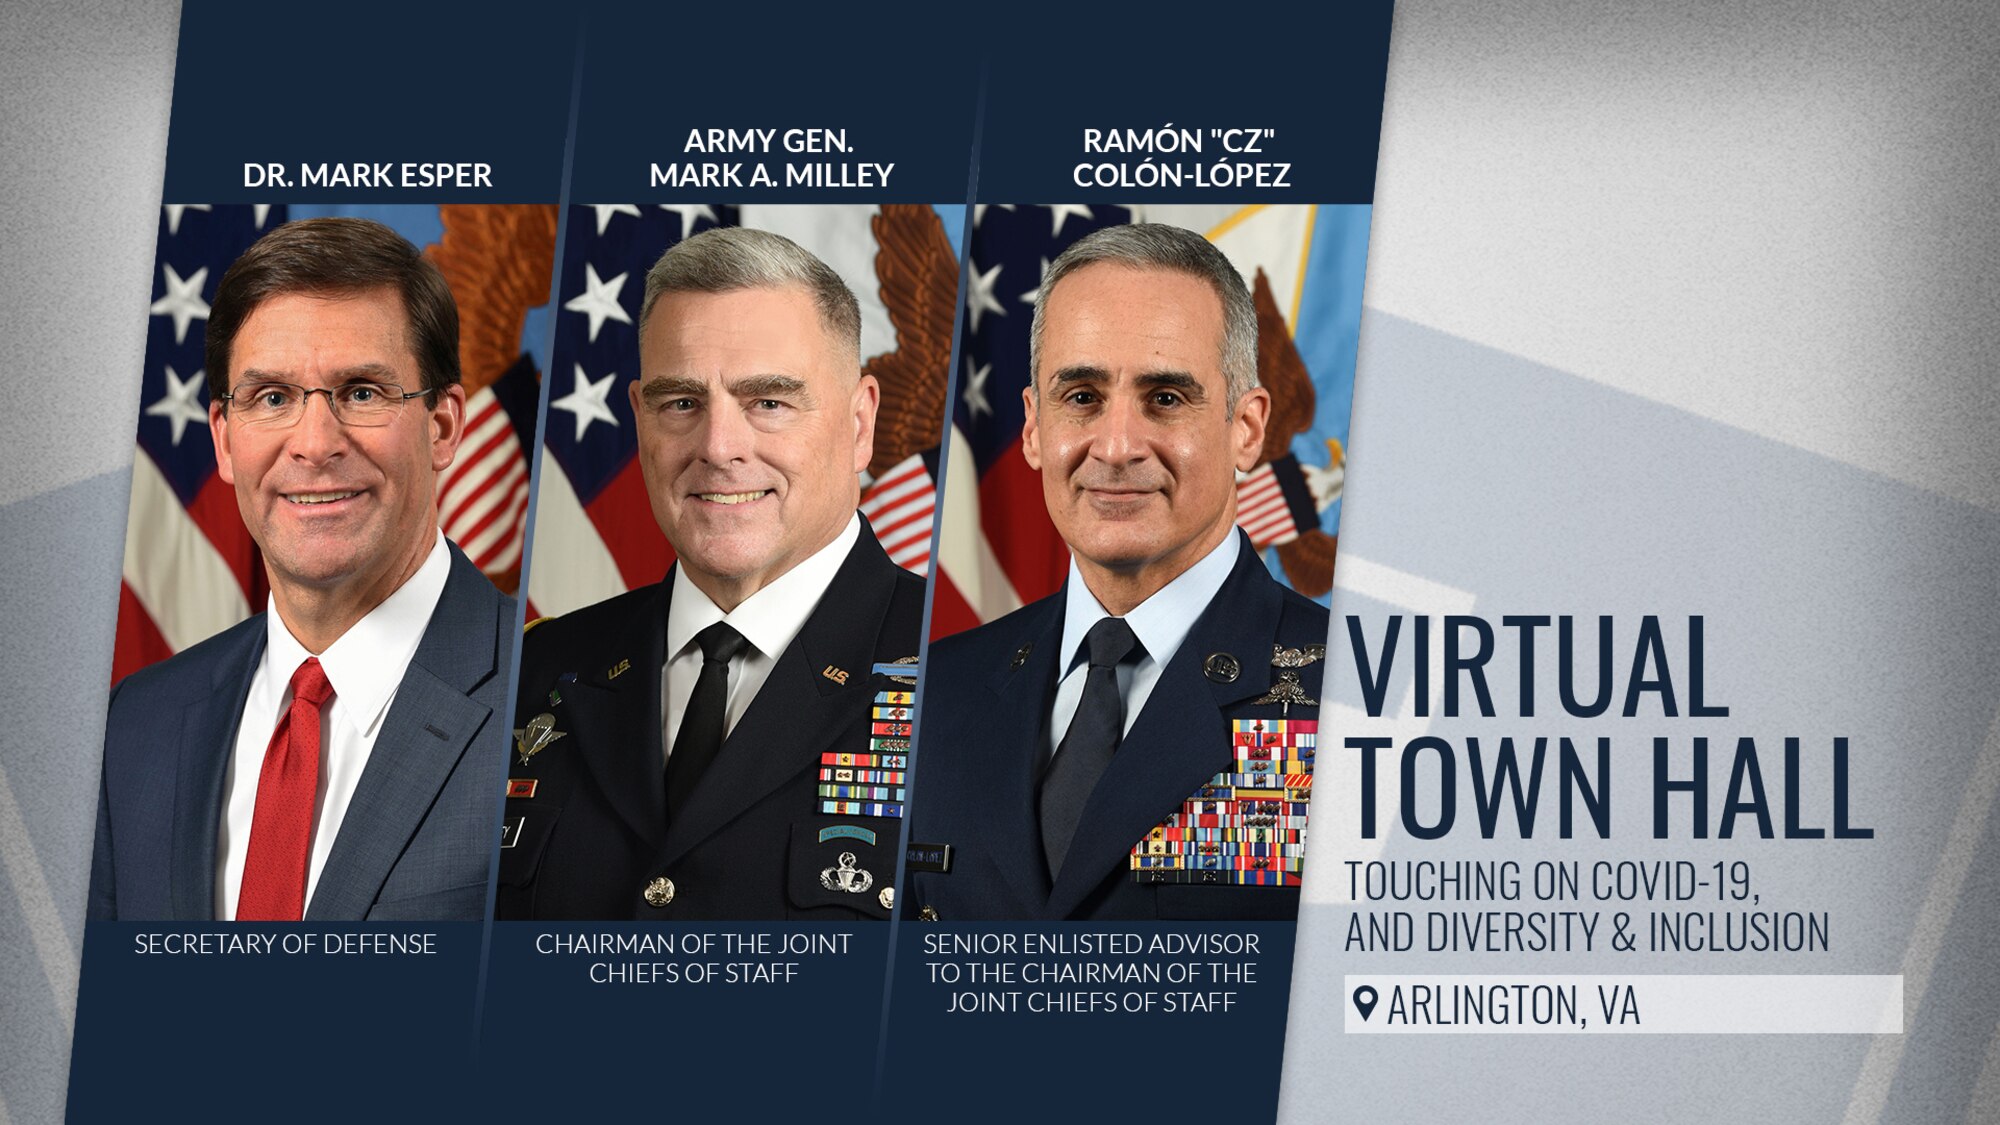 A graphic includes portrait photos of three top Defense Department leaders and their names and titles.